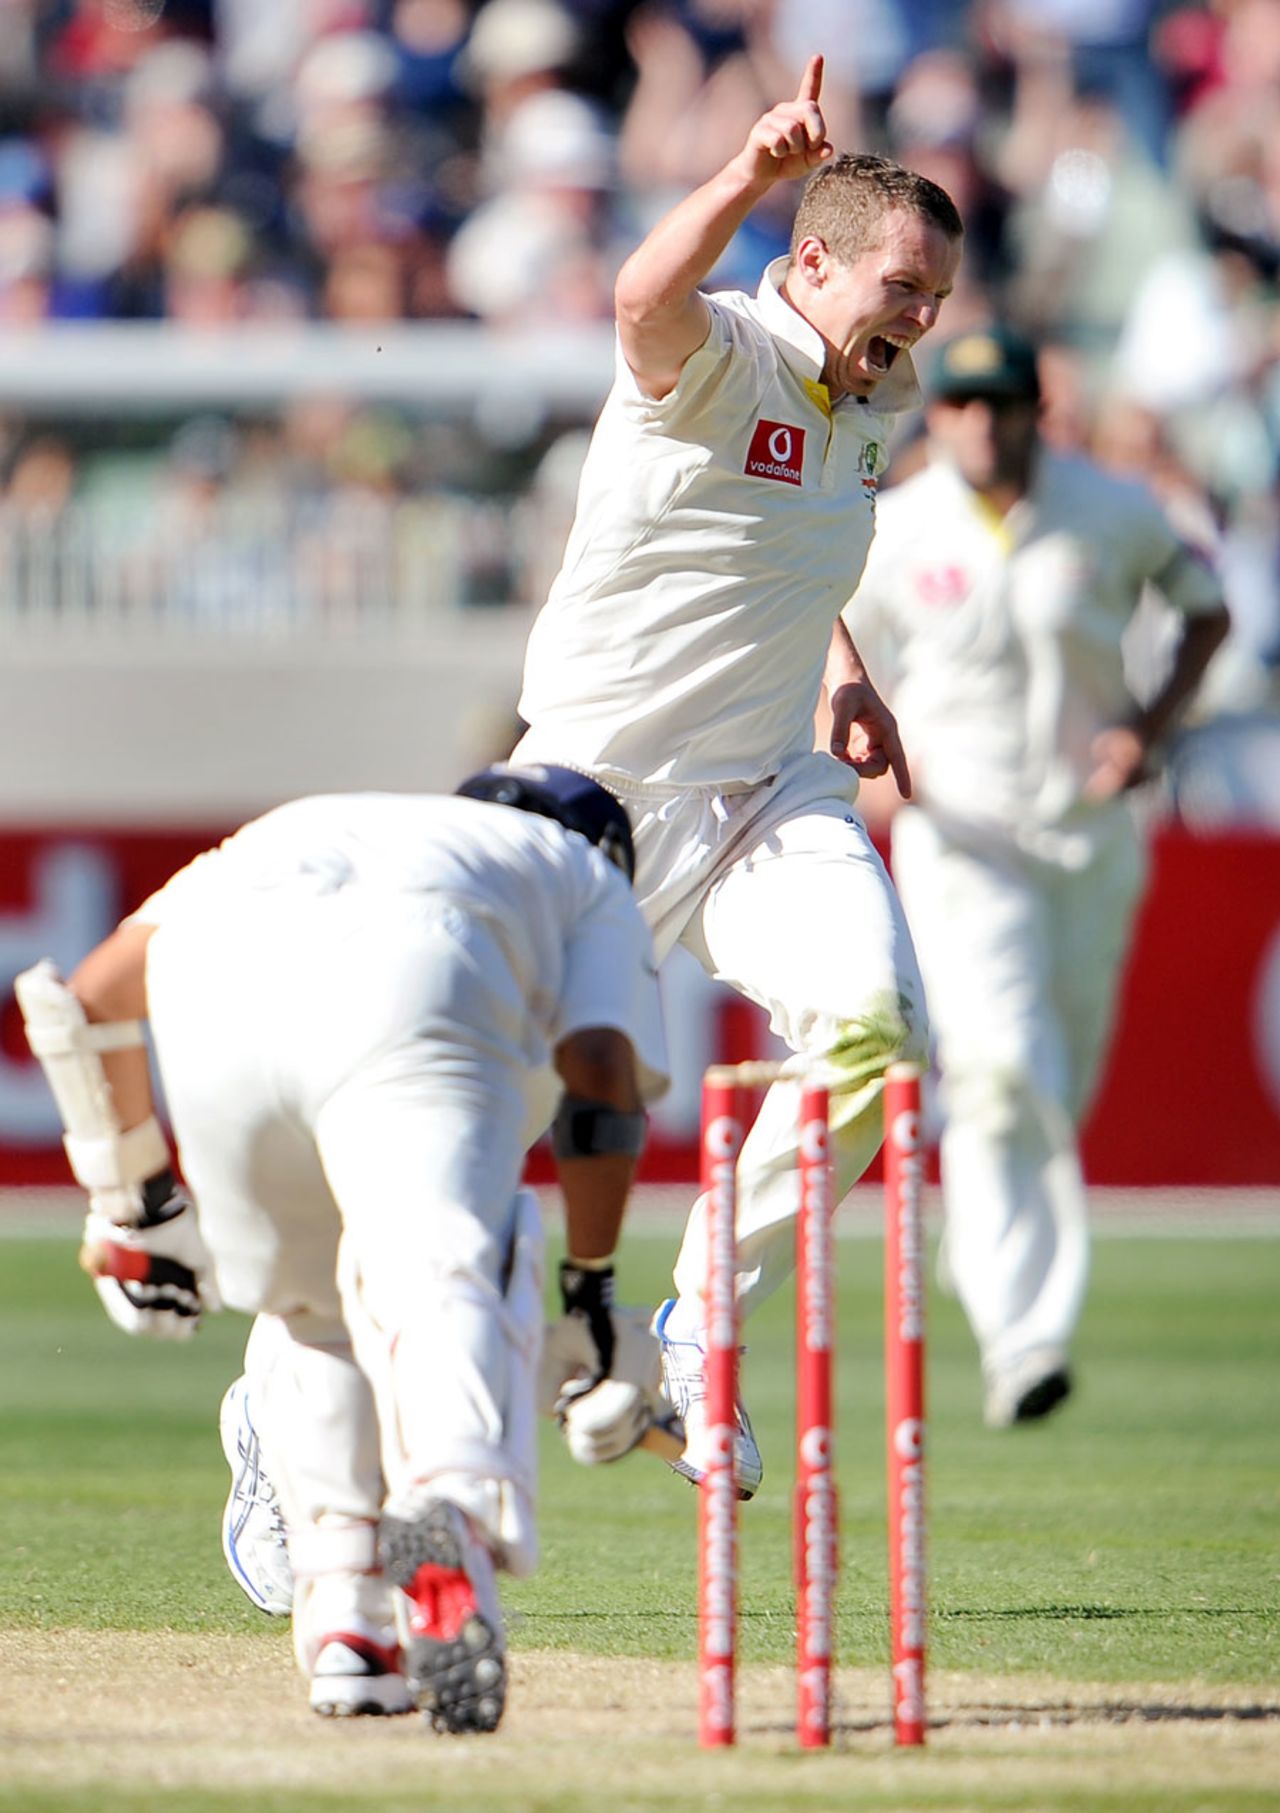 Peter Siddle knocked over Sachin Tendulkar in the final over of the day, Australia v India, 1st Test, Melbourne, 2nd day, December 27, 2011